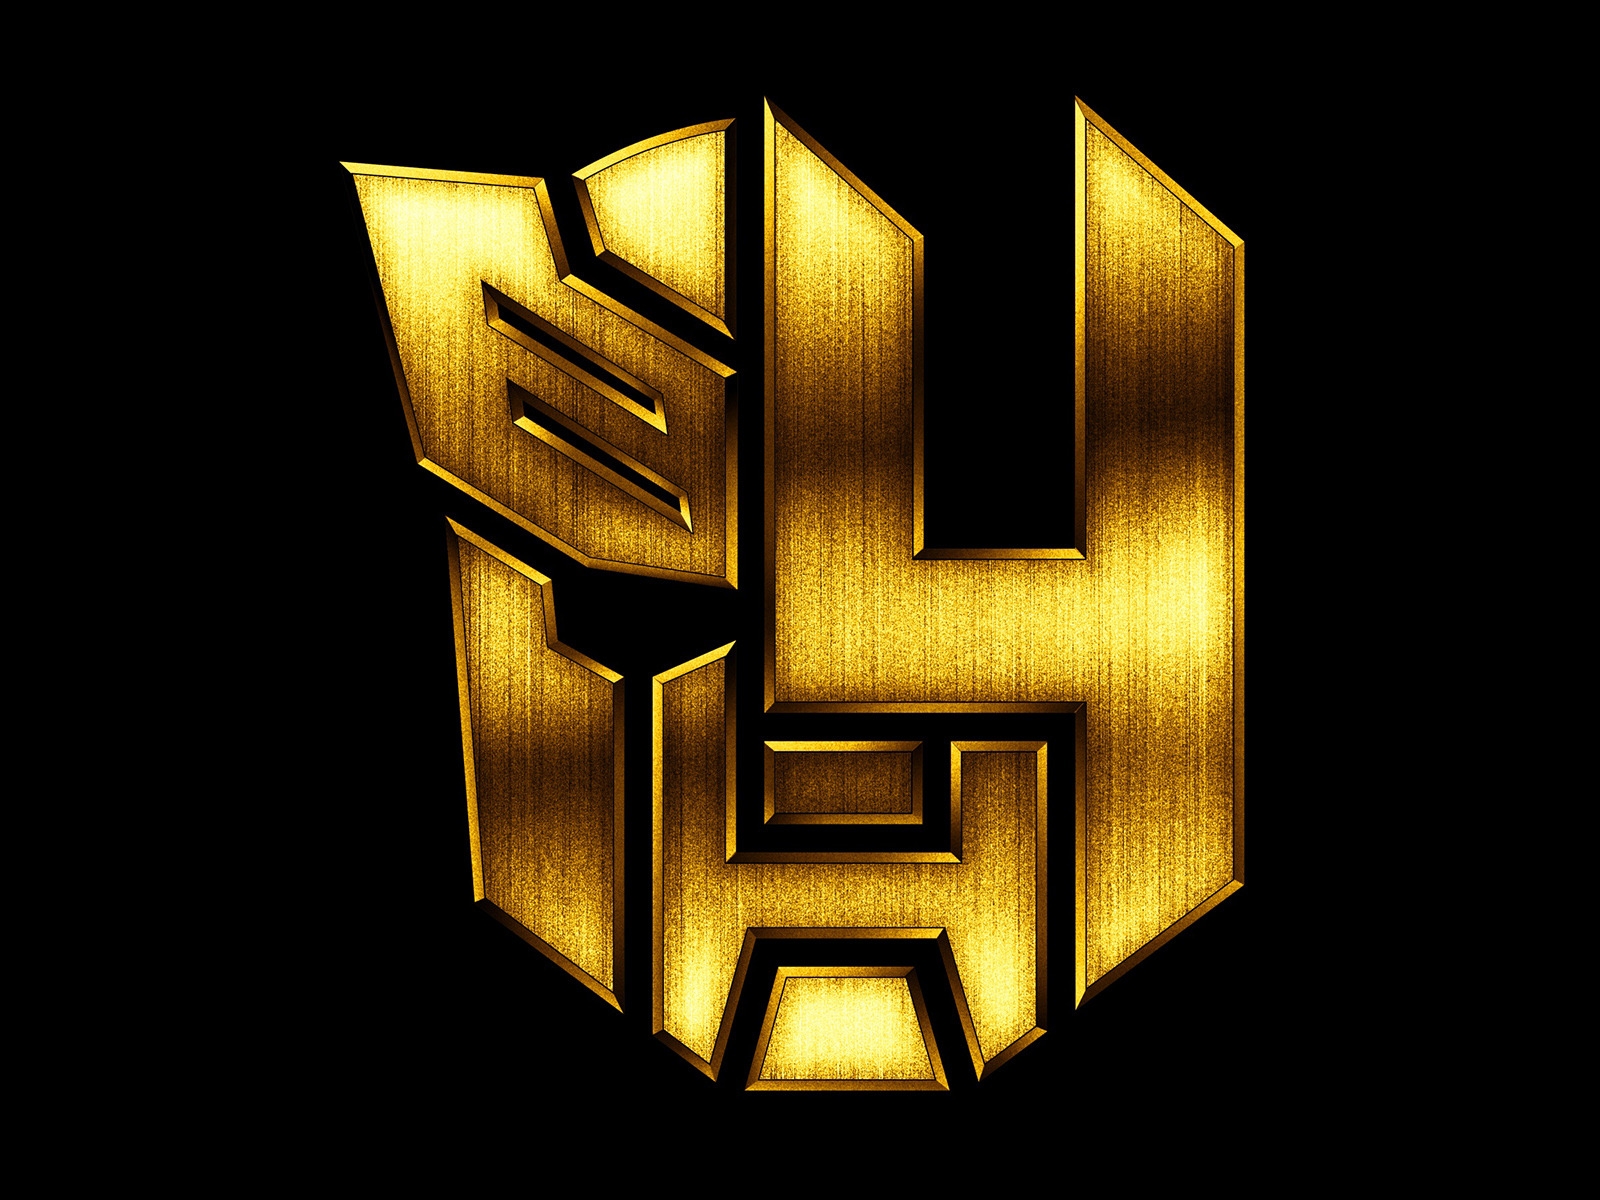 Transformers 4 Age of Extinction 2014 for 1600 x 1200 resolution